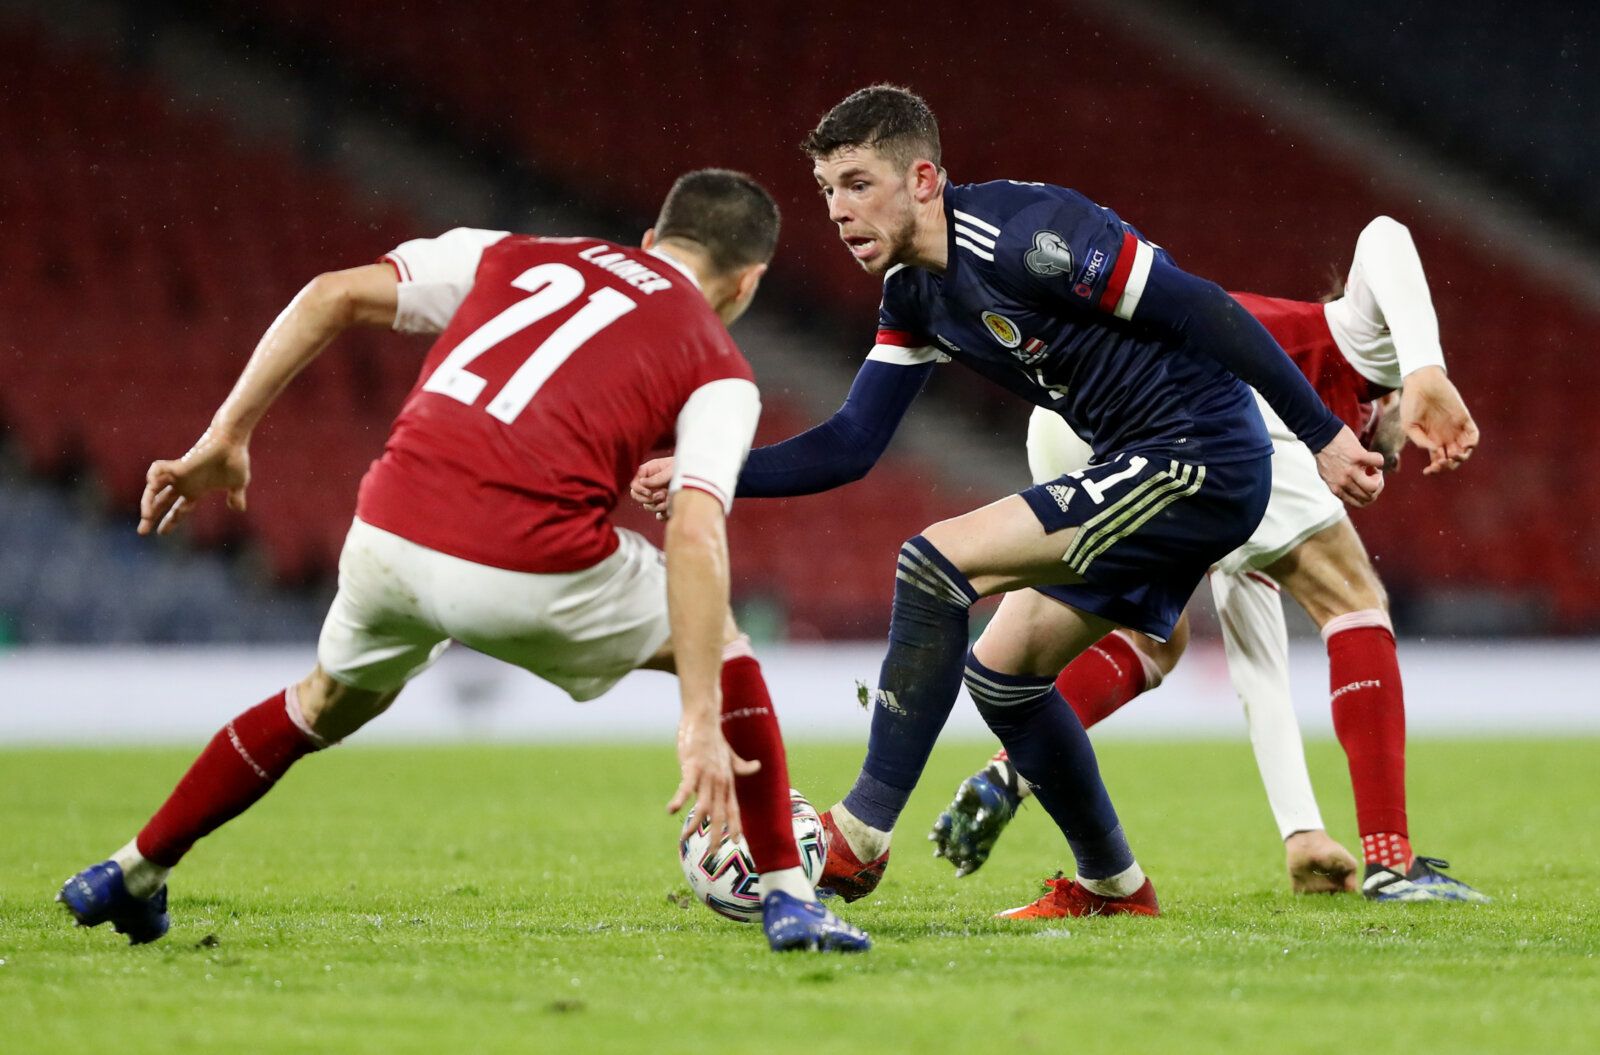 Soccer Football - World Cup Qualifiers Europe - Group F - Scotland v Austria - Hampden Park, Glasgow, Scotland, Britain - March 25, 2021 Austria's Stefan Lainer in action with Scotland's Ryan Christie REUTERS/Russell Cheyne